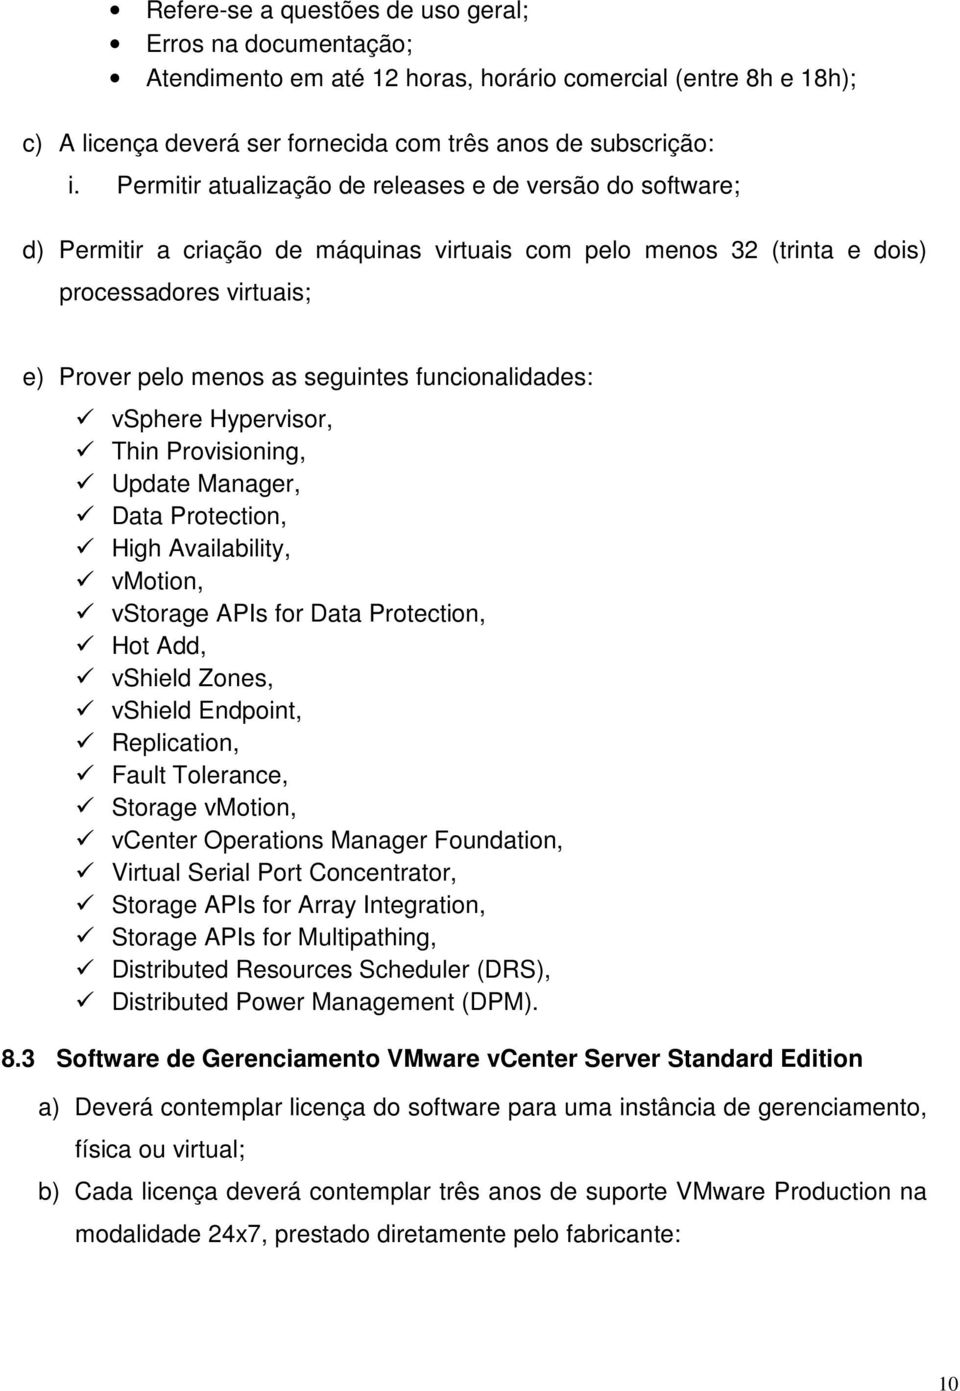 funcionalidades: vsphere Hypervisor, Thin Provisioning, Update Manager, Data Protection, High Availability, vmotion, vstorage APIs for Data Protection, Hot Add, vshield Zones, vshield Endpoint,